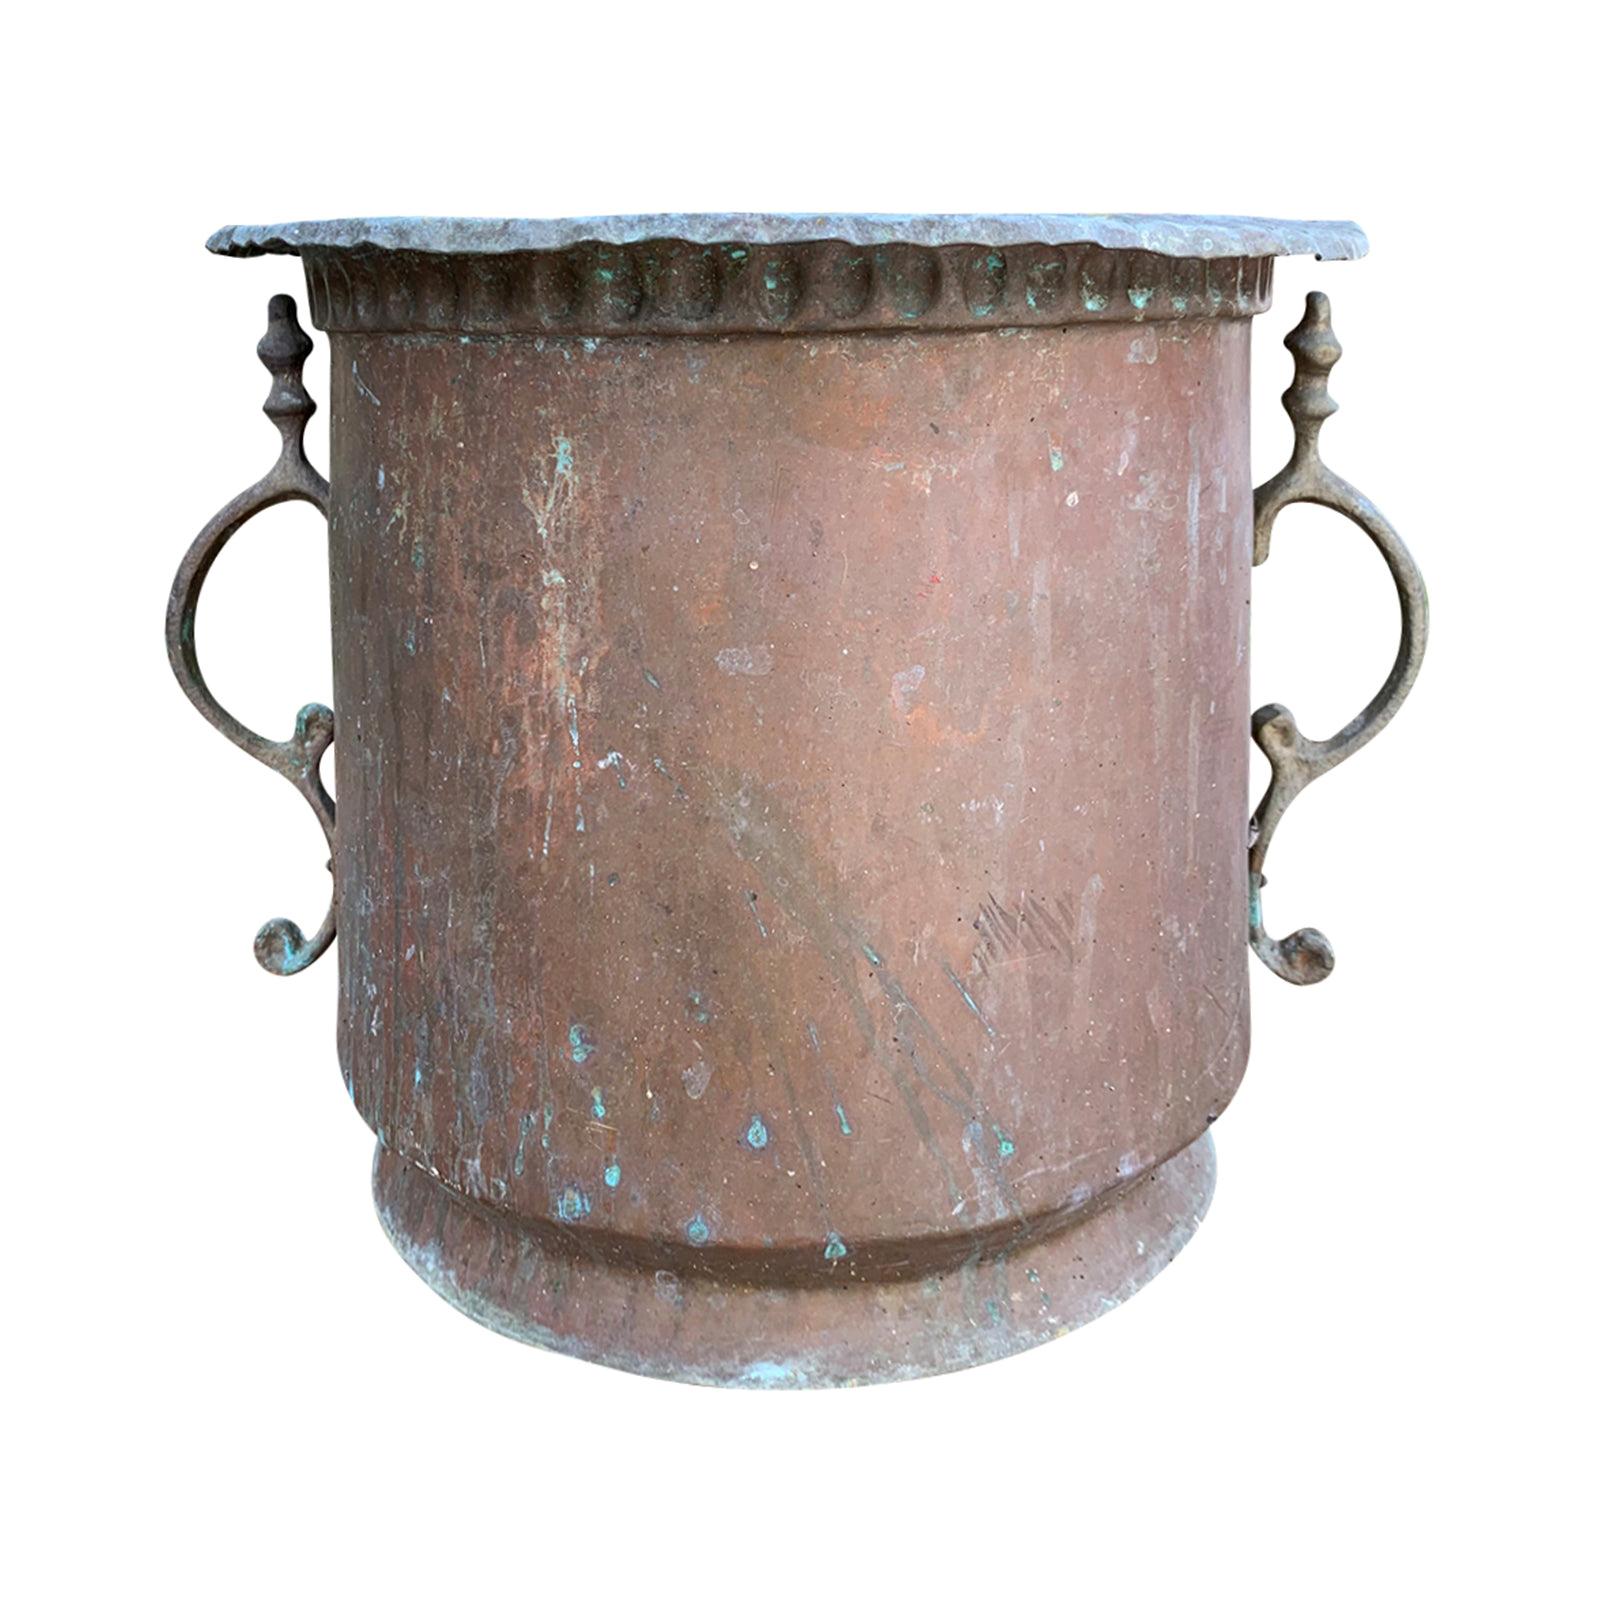 19th-20th Century Copper Cachepot with Handles